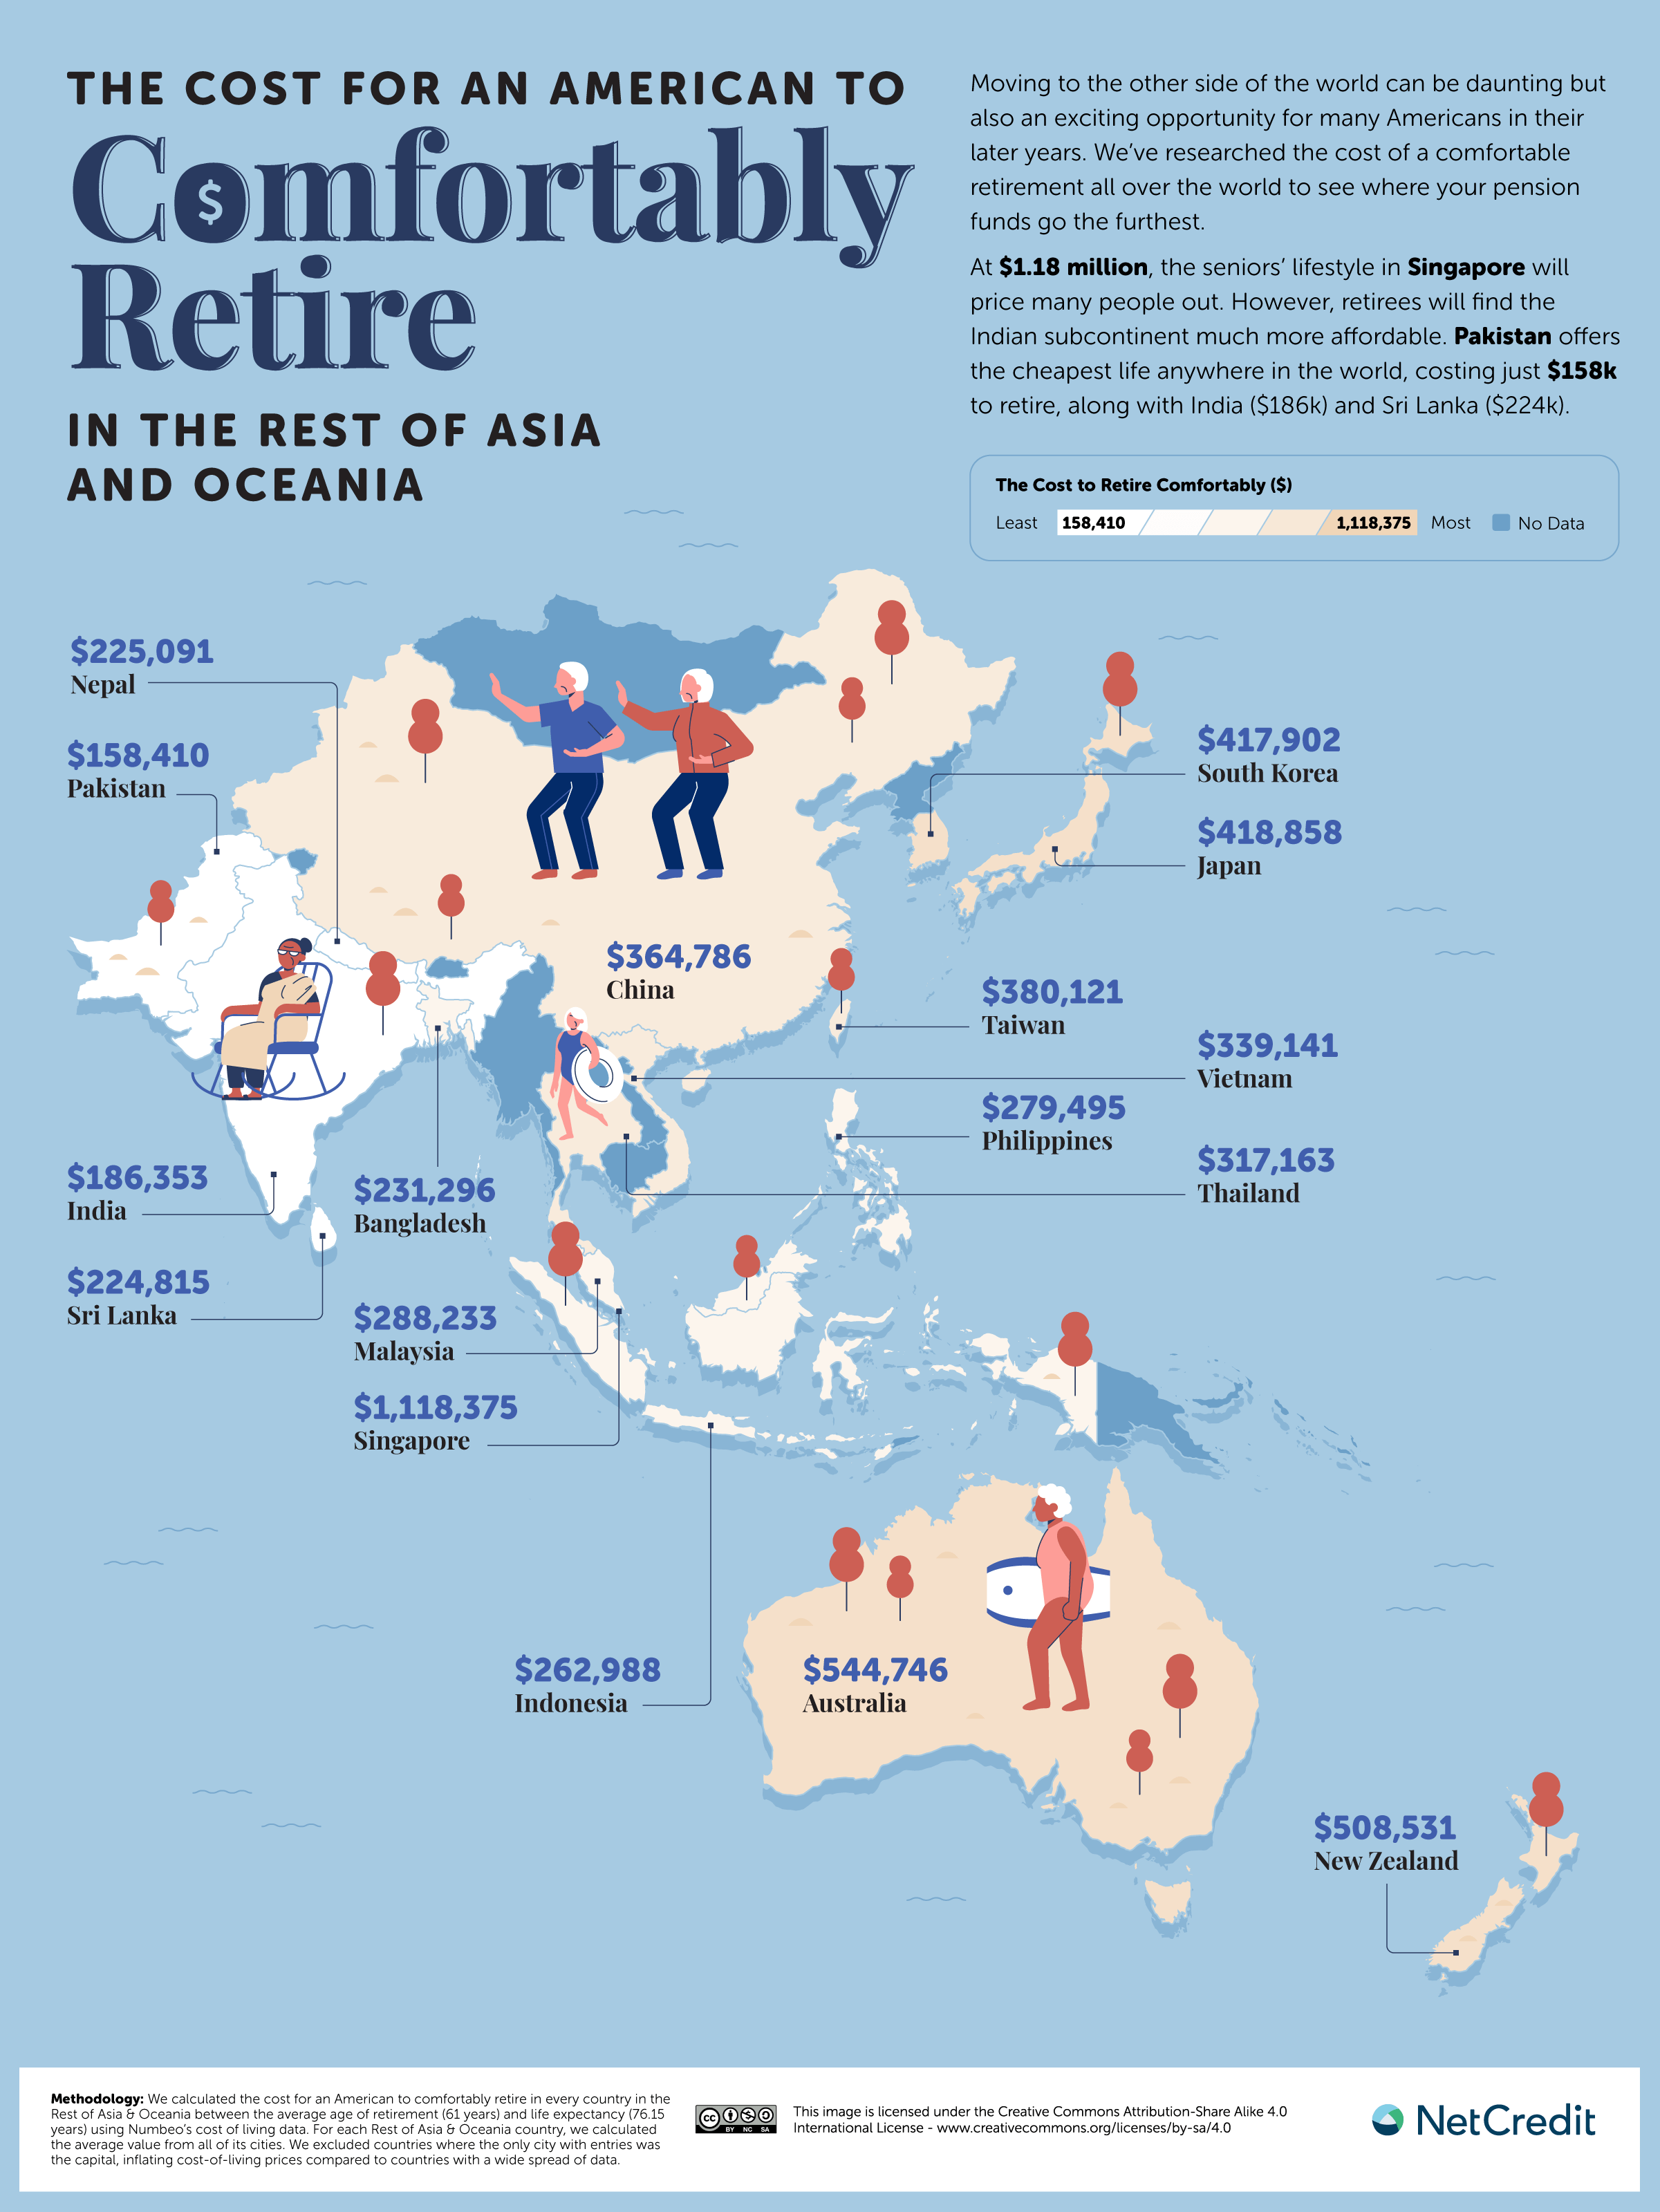 Cost of a Comfortable Retirement Across Asia and Oceania Map